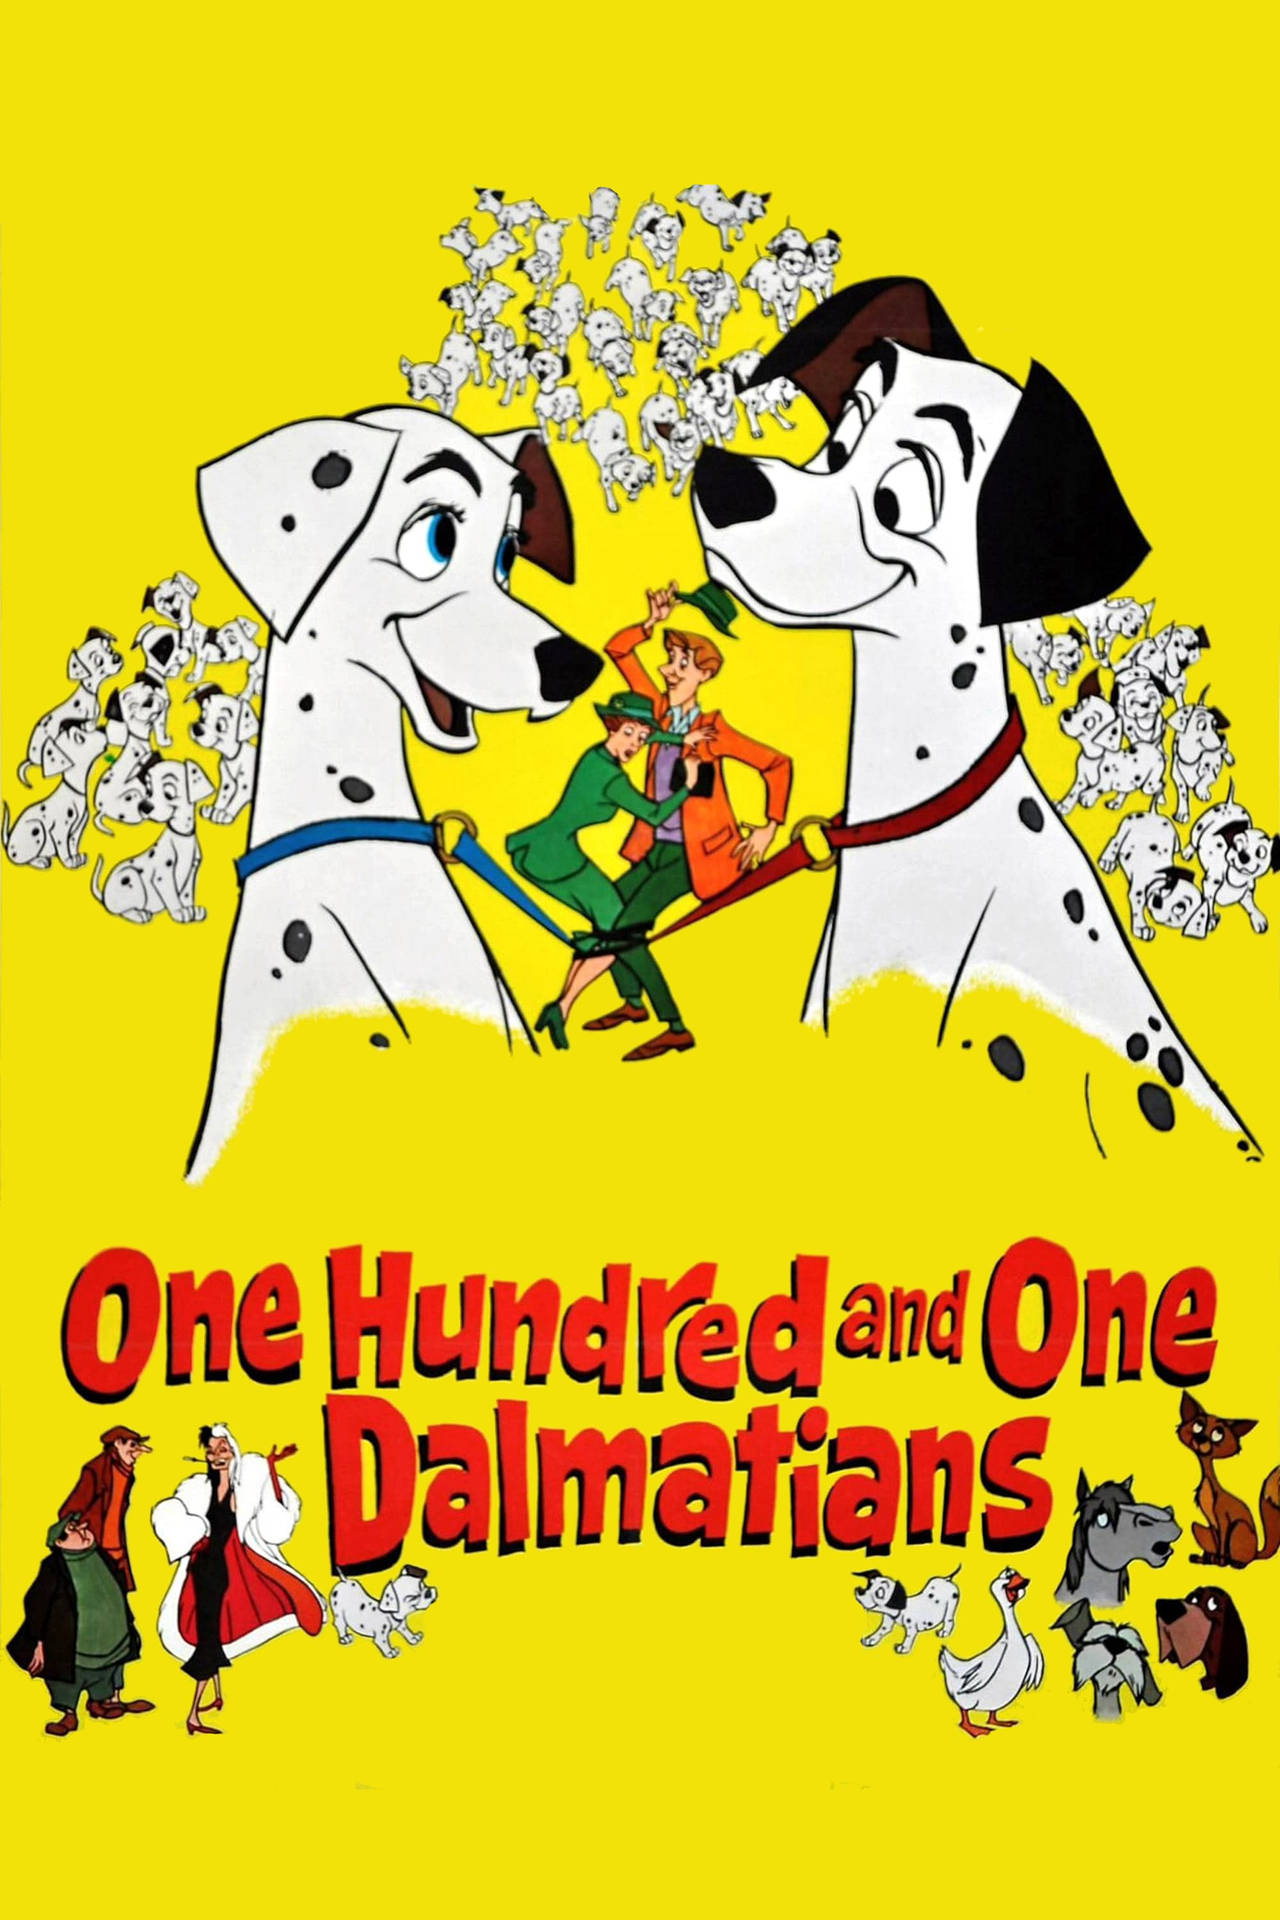 101 Dalmatians Animated Film Poster Background